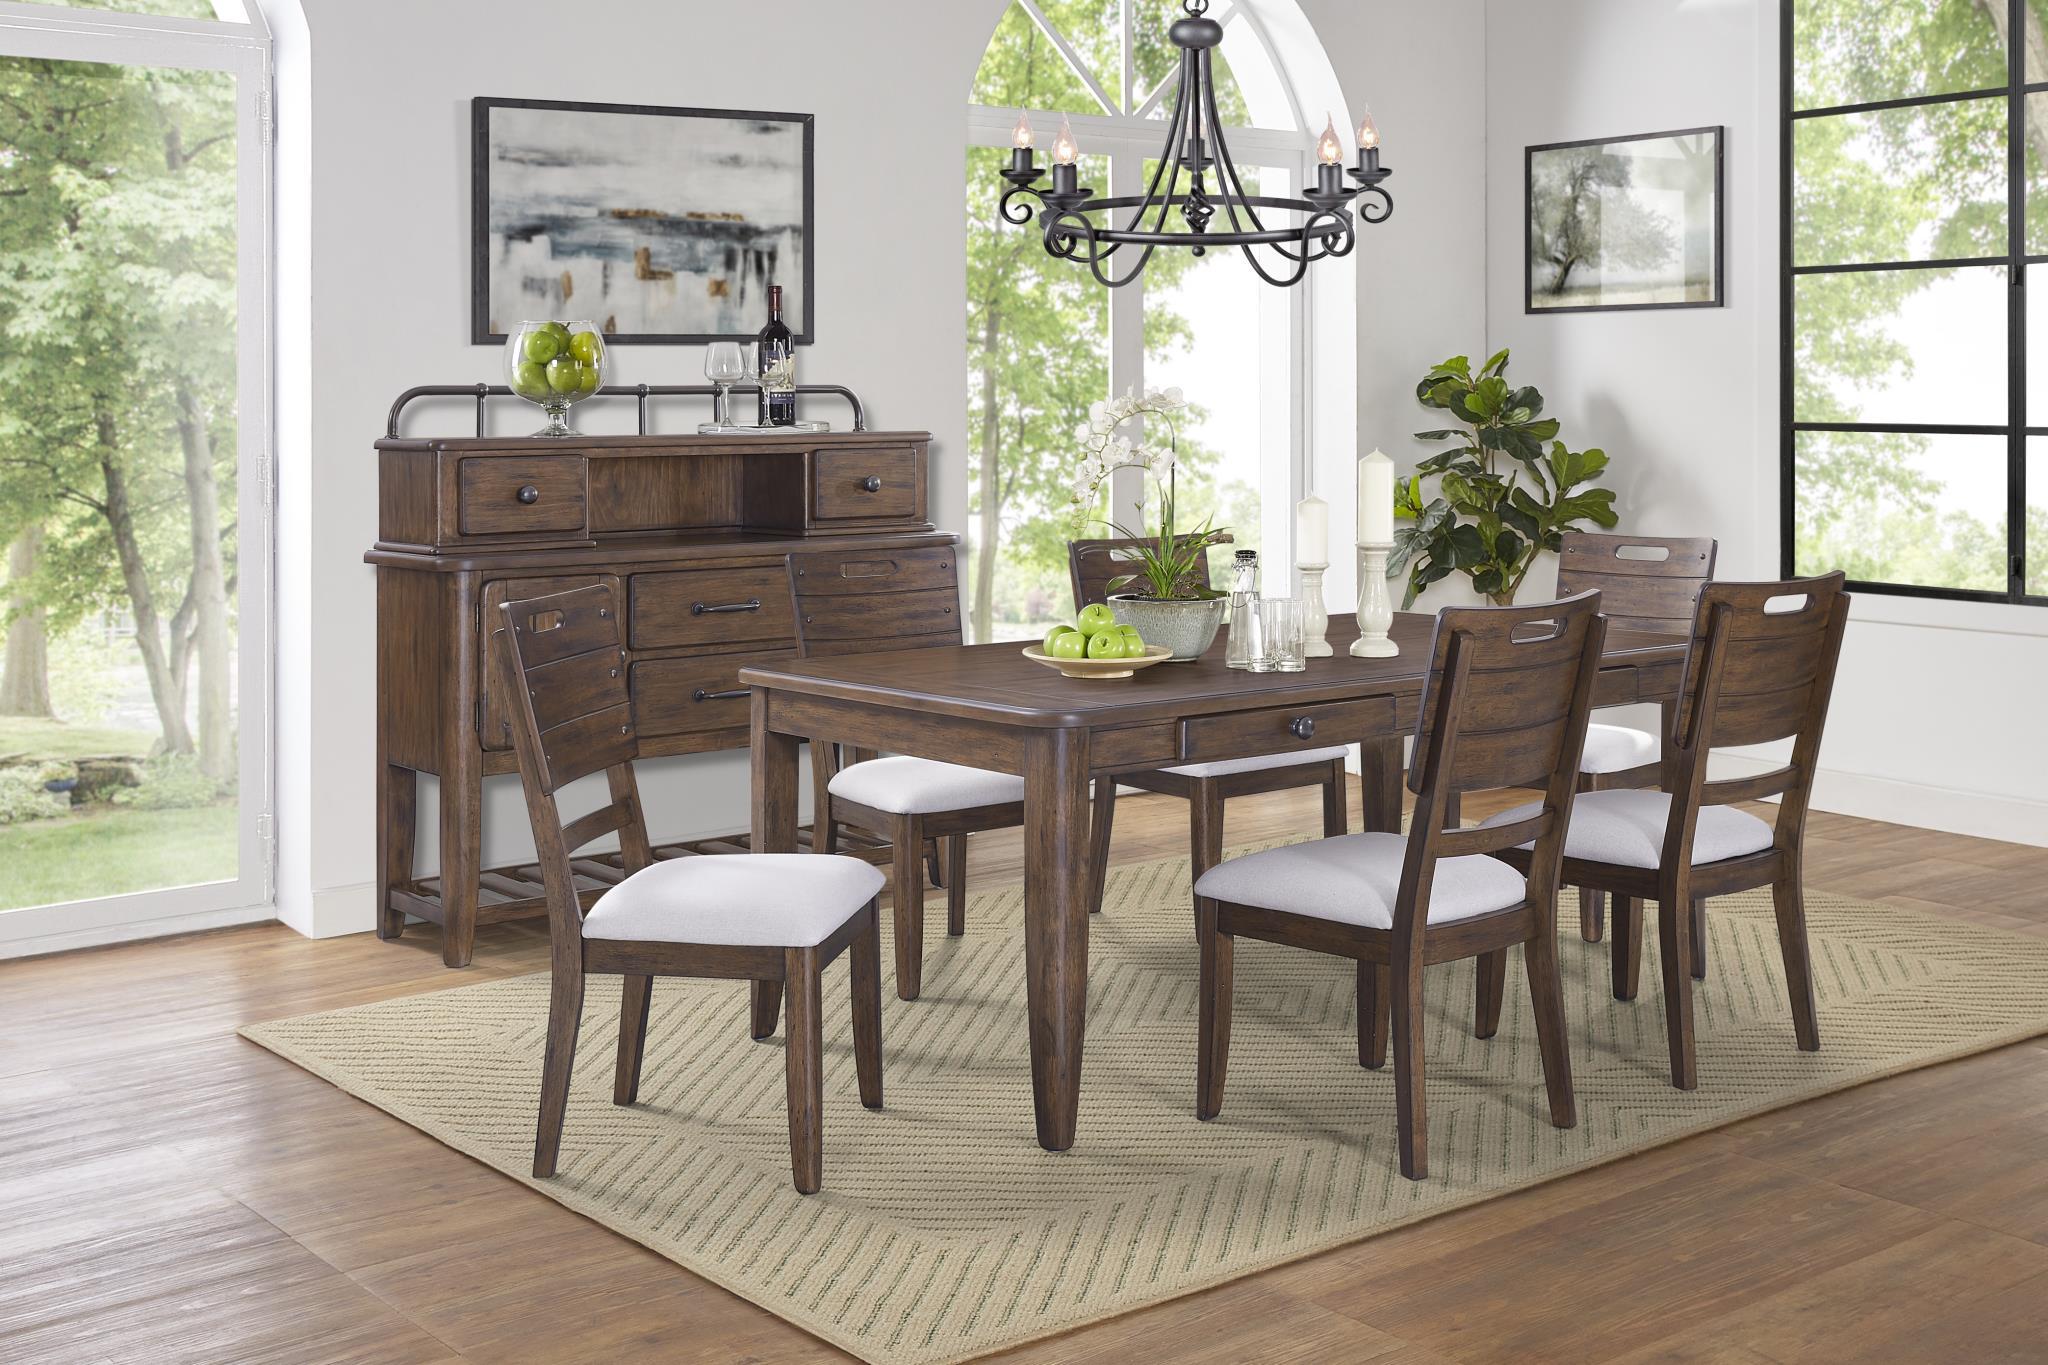 Rustic, Cottage, Farmhouse Dining Table Set DANVILLE 315-501-Set-7 315-501-7pcs in Brown Fabric